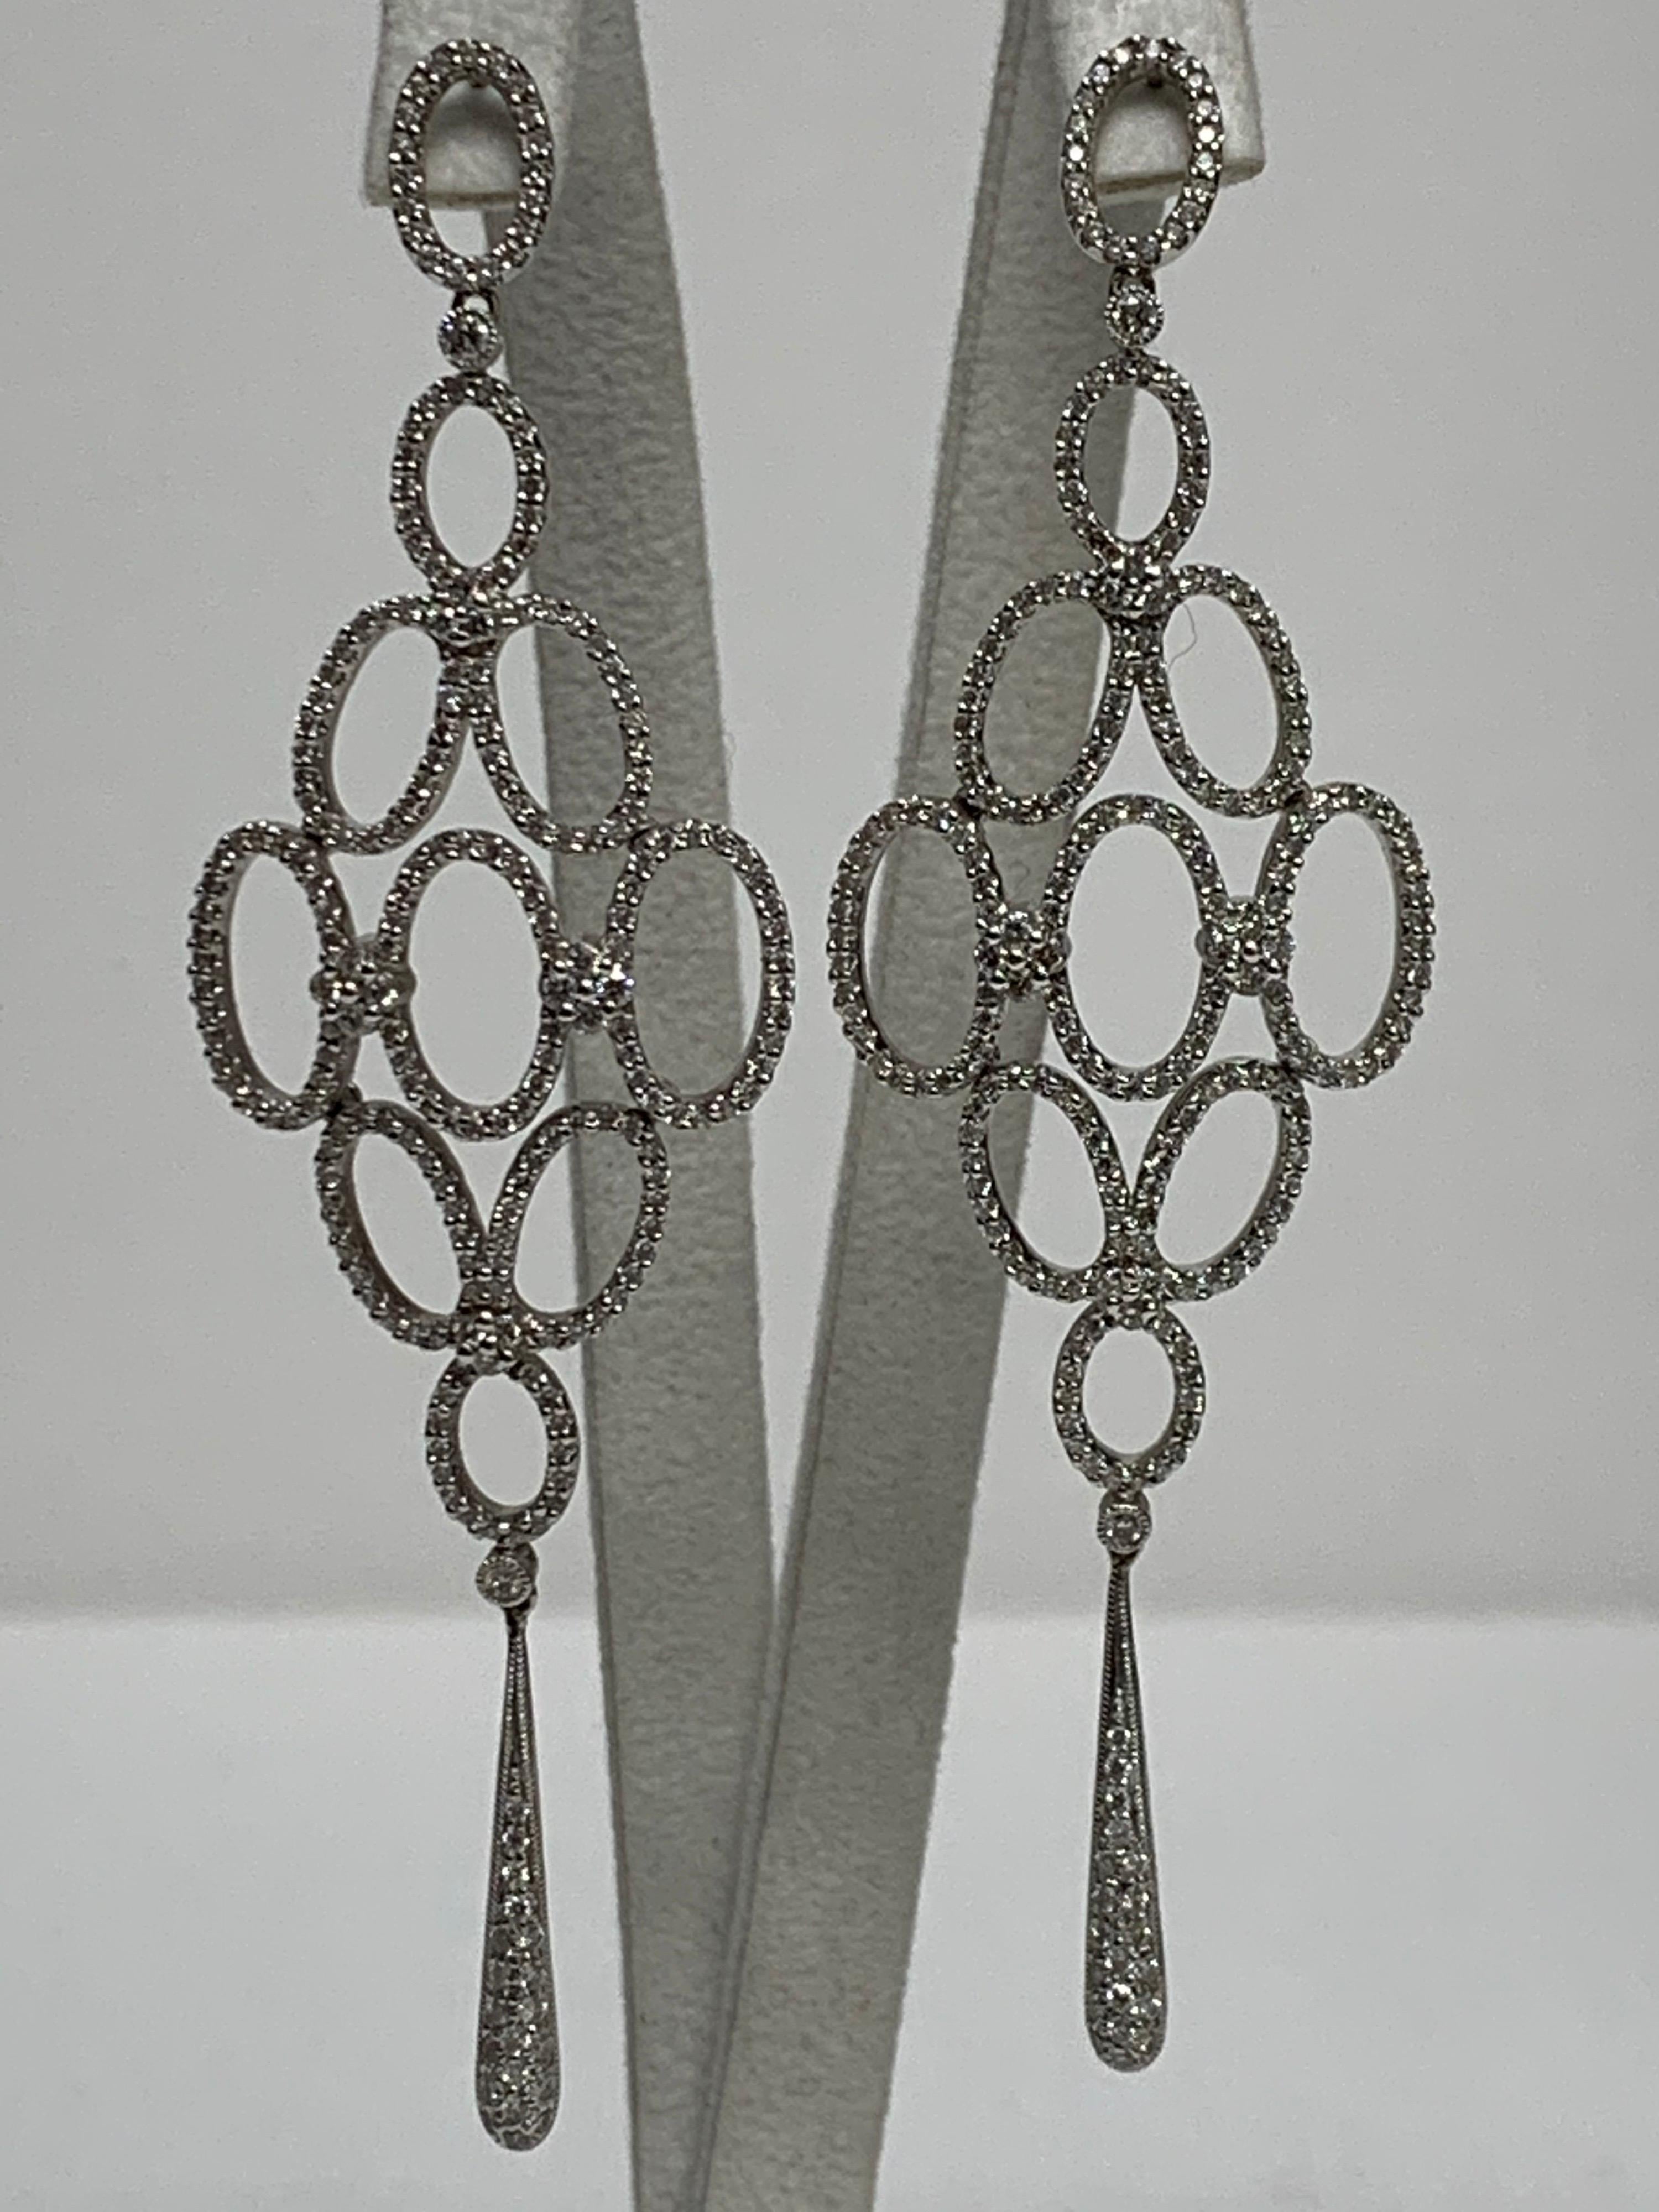 Pavé Diamond, White Gold Earrings, Art Nouveau

Featuring an exquisite pair of White Pavé Diamond Earrings with a total weight of 2.36 carats, set in 18K White Gold.

This one-of-a-kind pair of earrings was created by hand and in CAD, Computer Aided